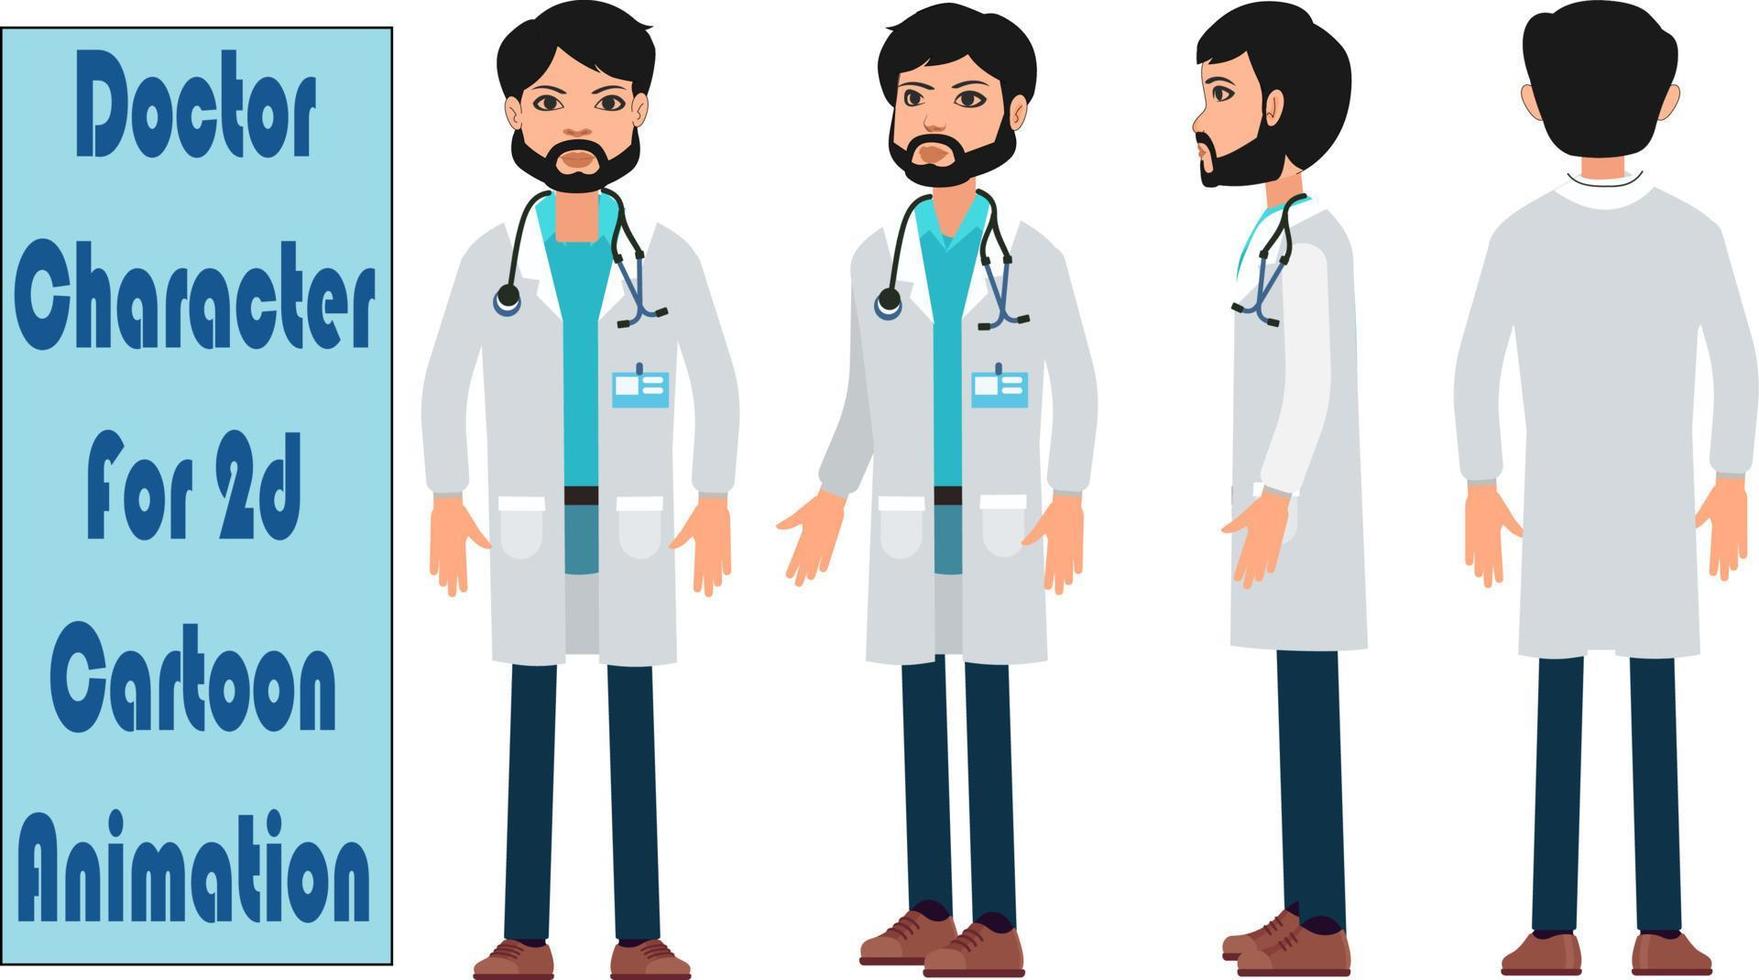 Doctor character for cartoon animation. vector